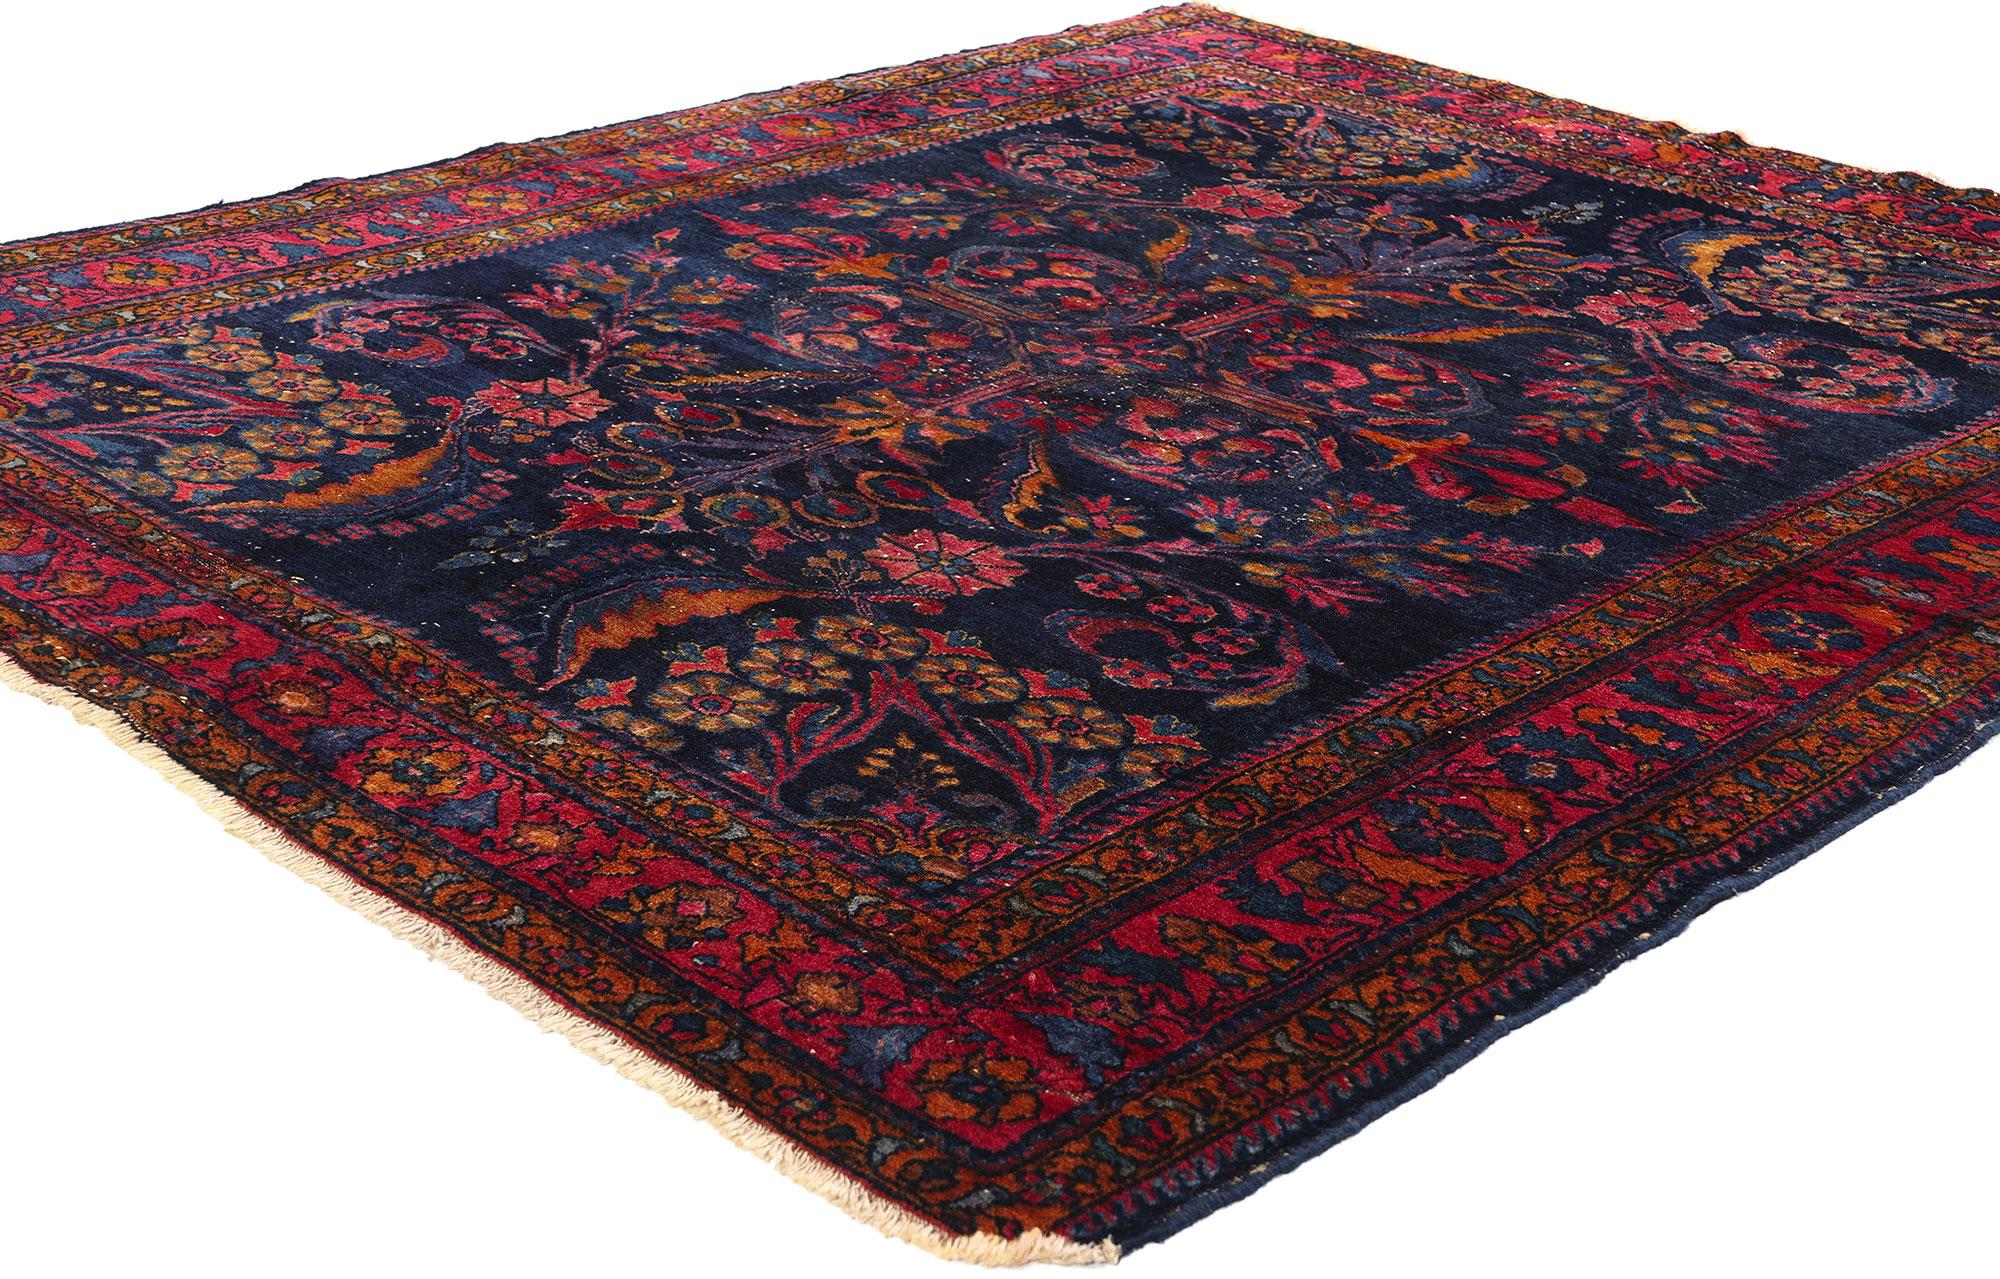 77633 Antique Navy Blue Persian Lilihan Rug, 05'06 x 06'03. Persian Lilihan rugs, originating from the village of Lilihan in Iran, are esteemed for their intricate floral and geometric designs, woven using the symmetrical knot technique with vibrant